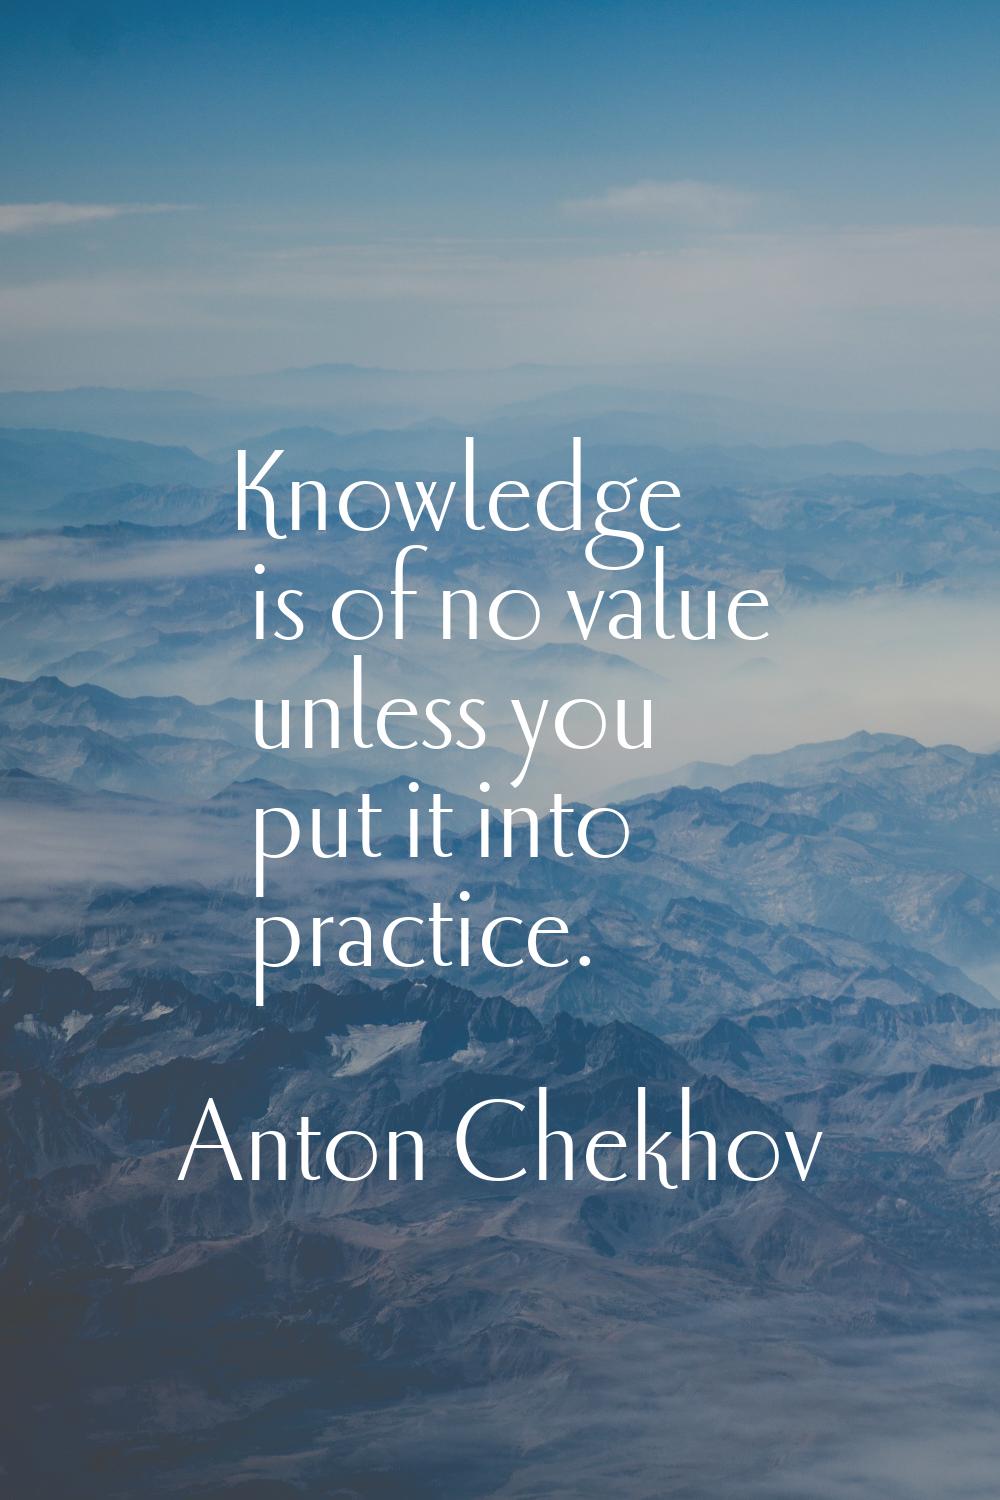 Knowledge is of no value unless you put it into practice.